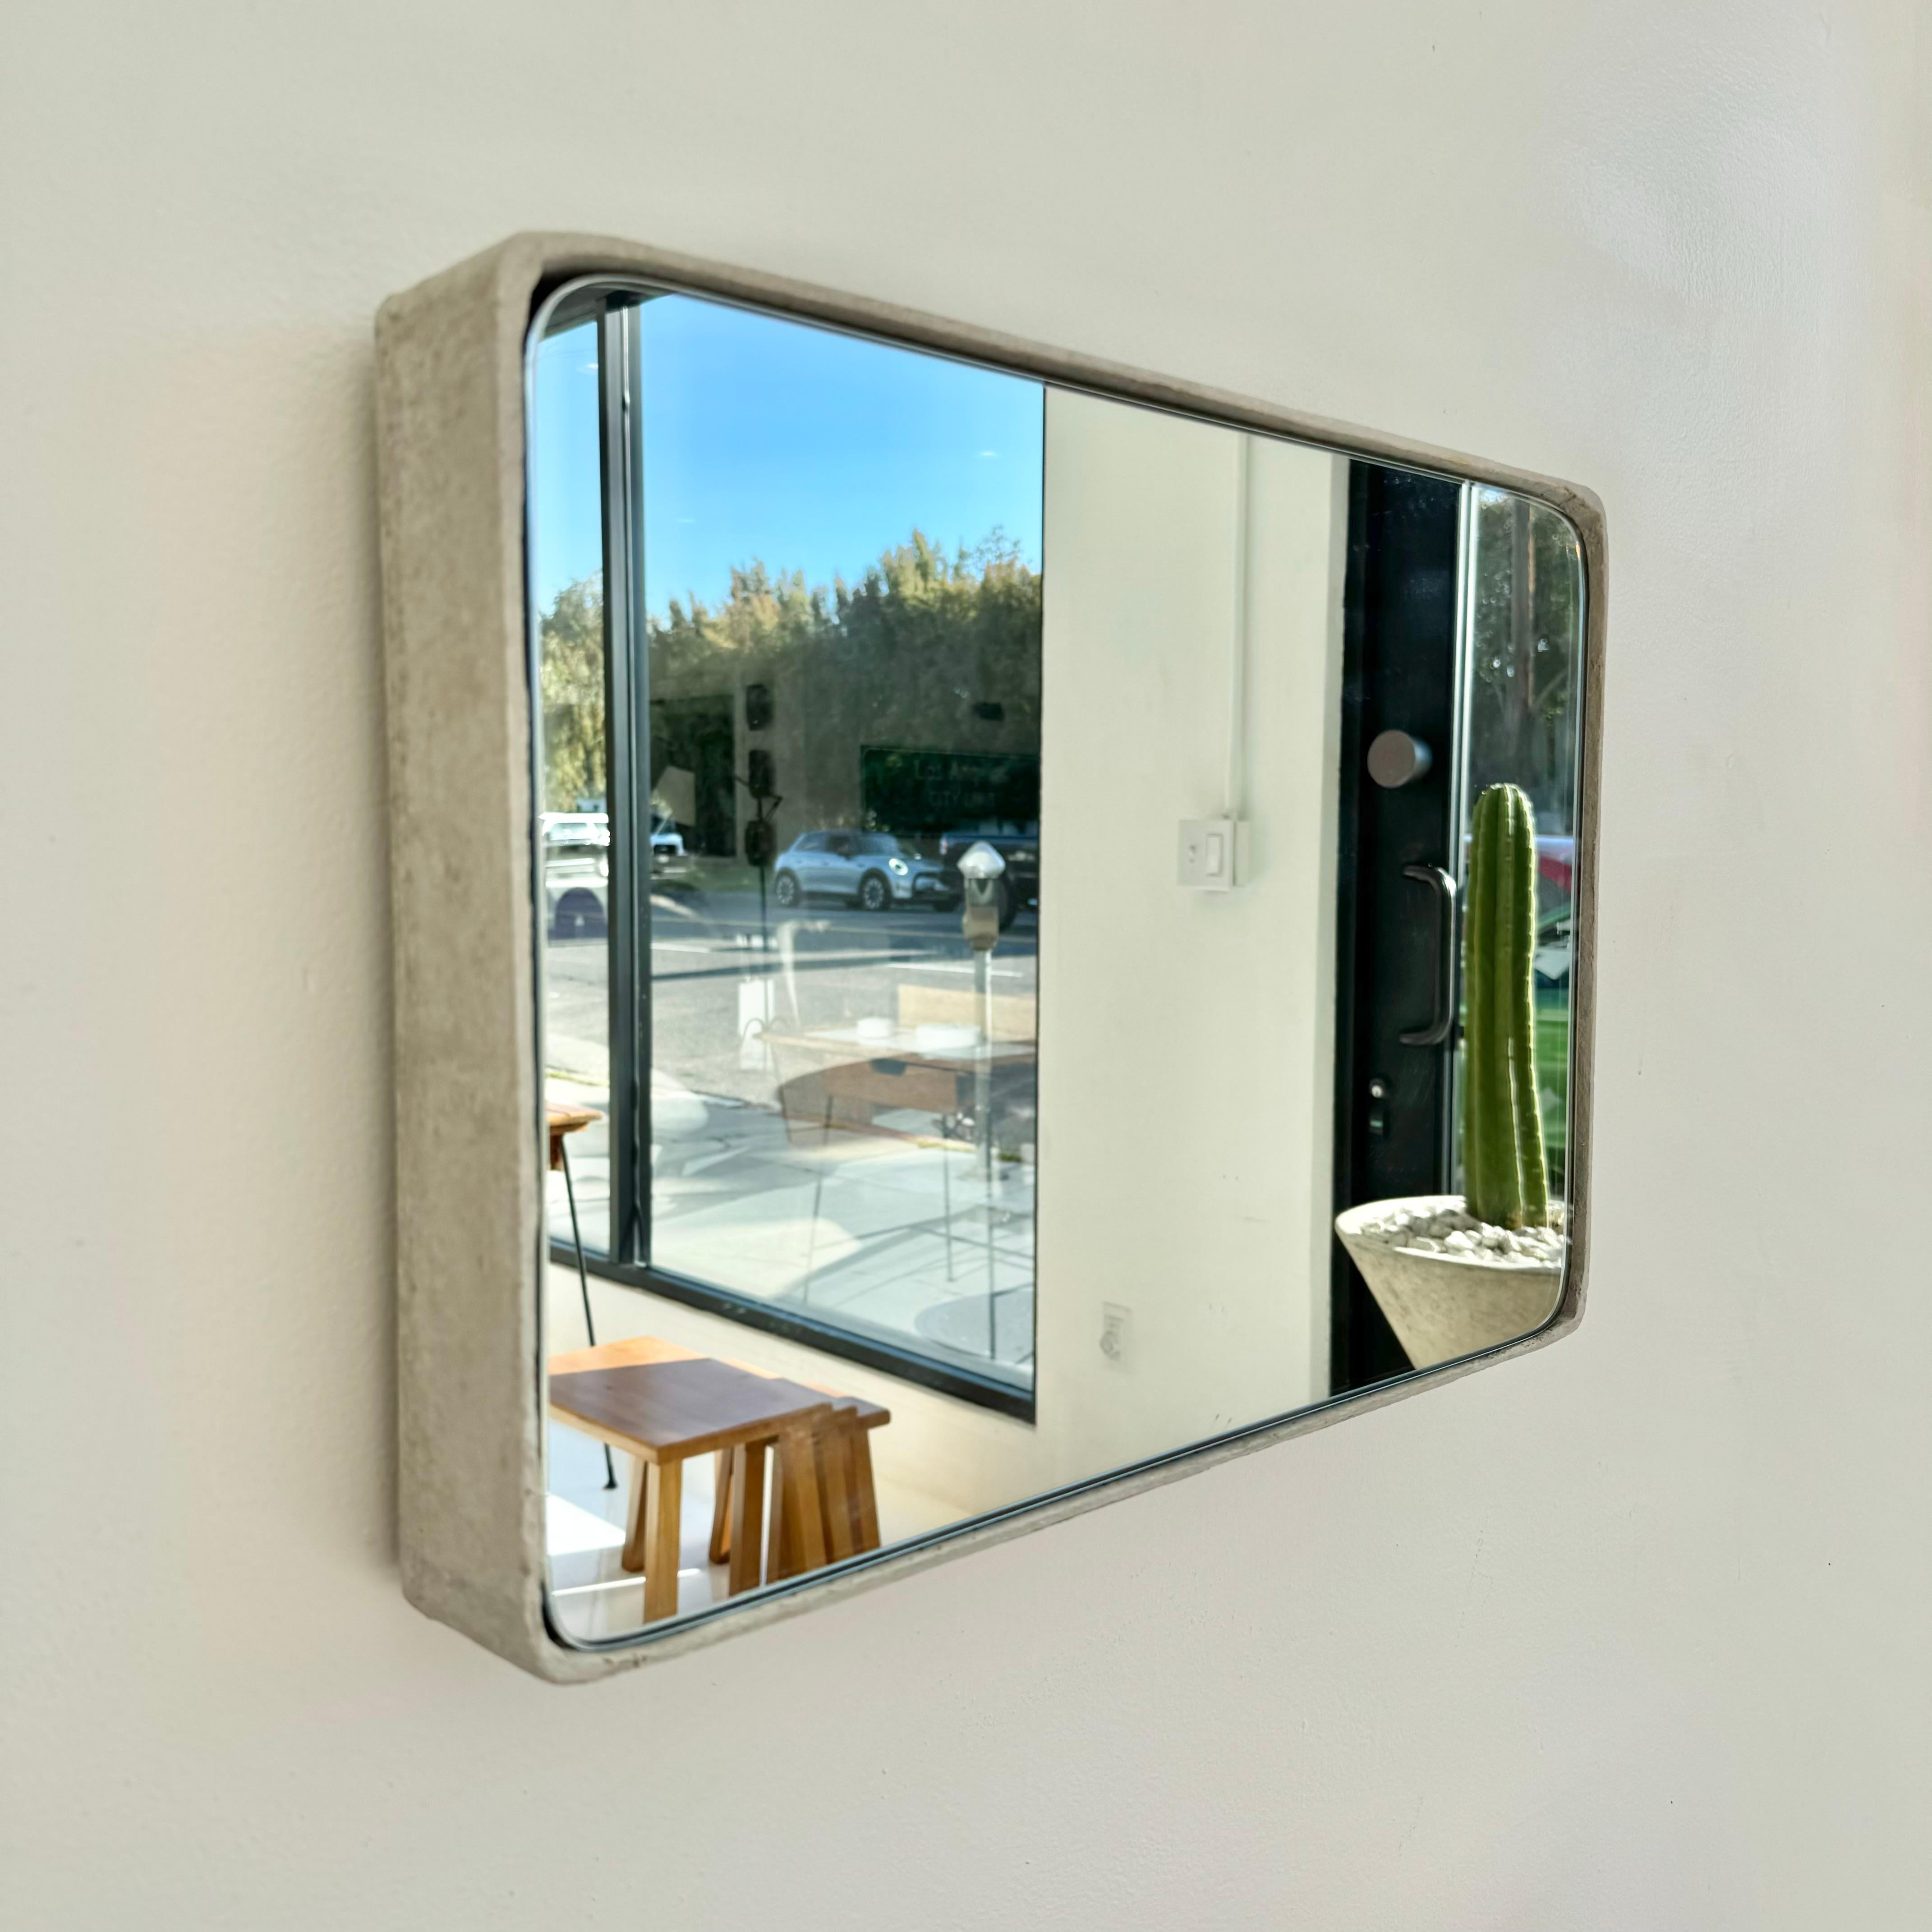 Gorgeous rectangular Willy Guhl concrete mirror. Concrete vessel originally produced at the Eternit factory in Switzerland in the 1960’s. Custom glass/mirror was professionally hand cut and added recently. Beautiful patina as expected with age